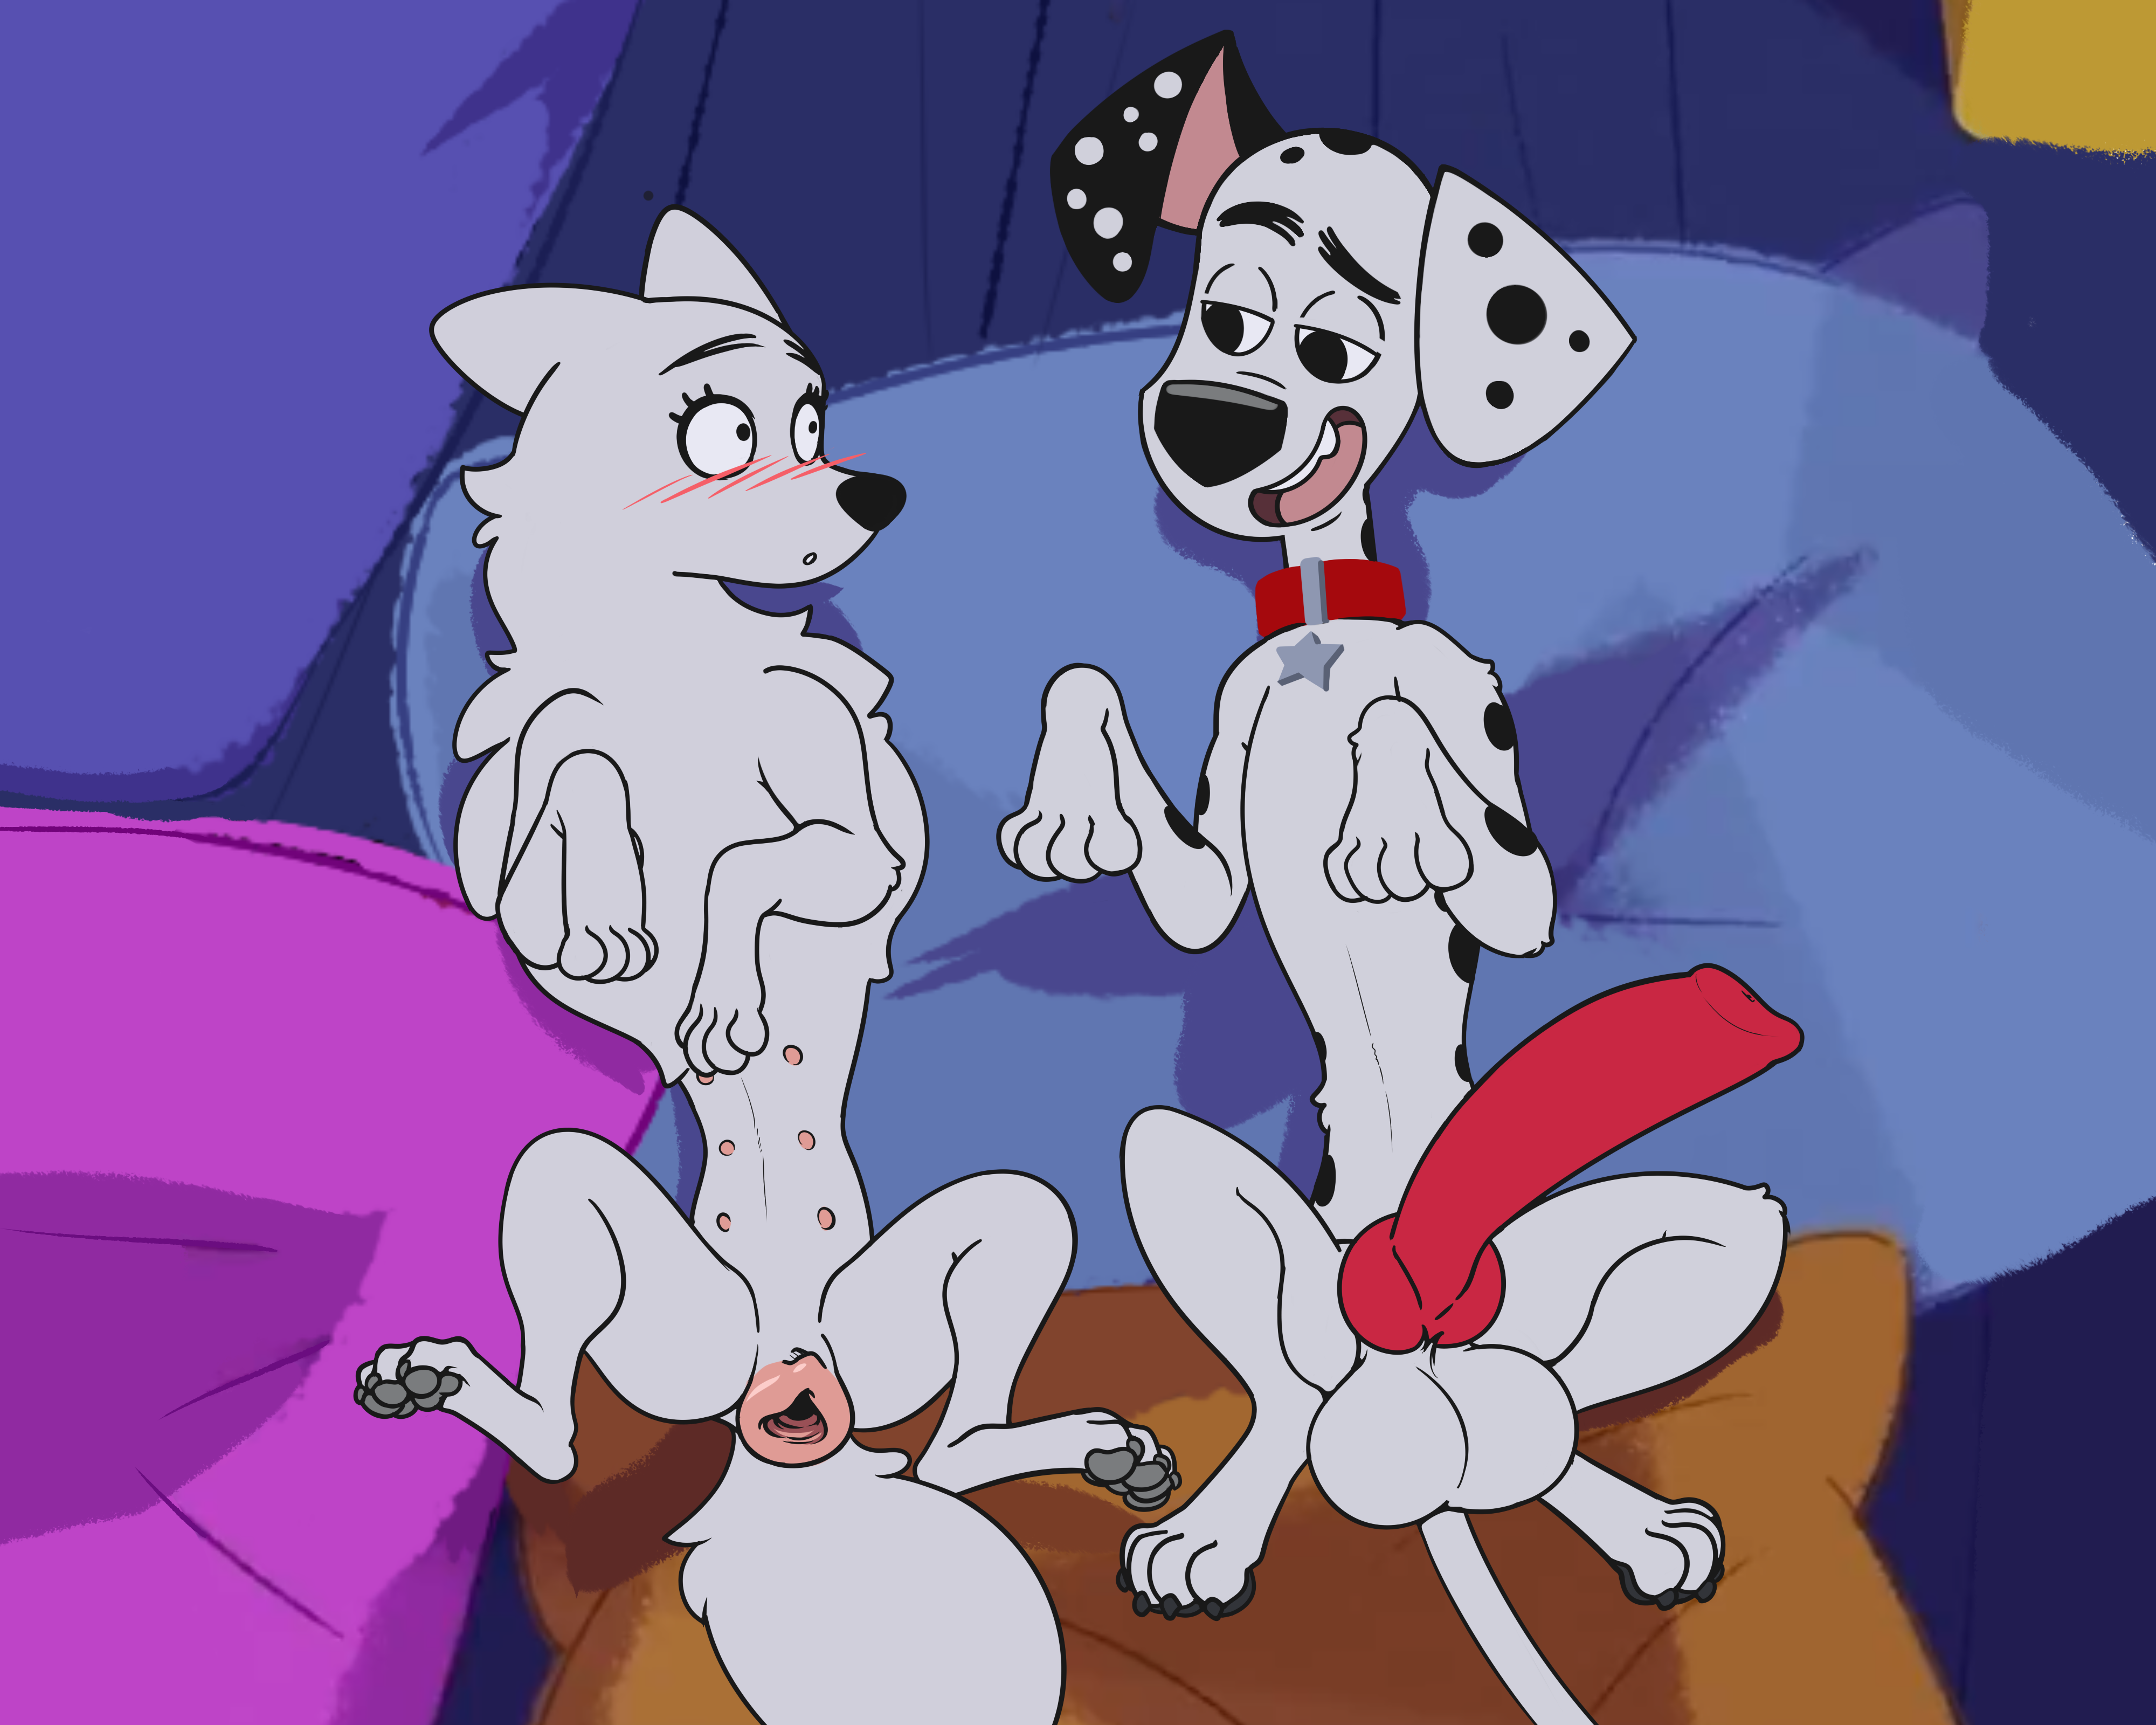 101 dalmatians porn comics ♥ Rule34 - If it exists, there is